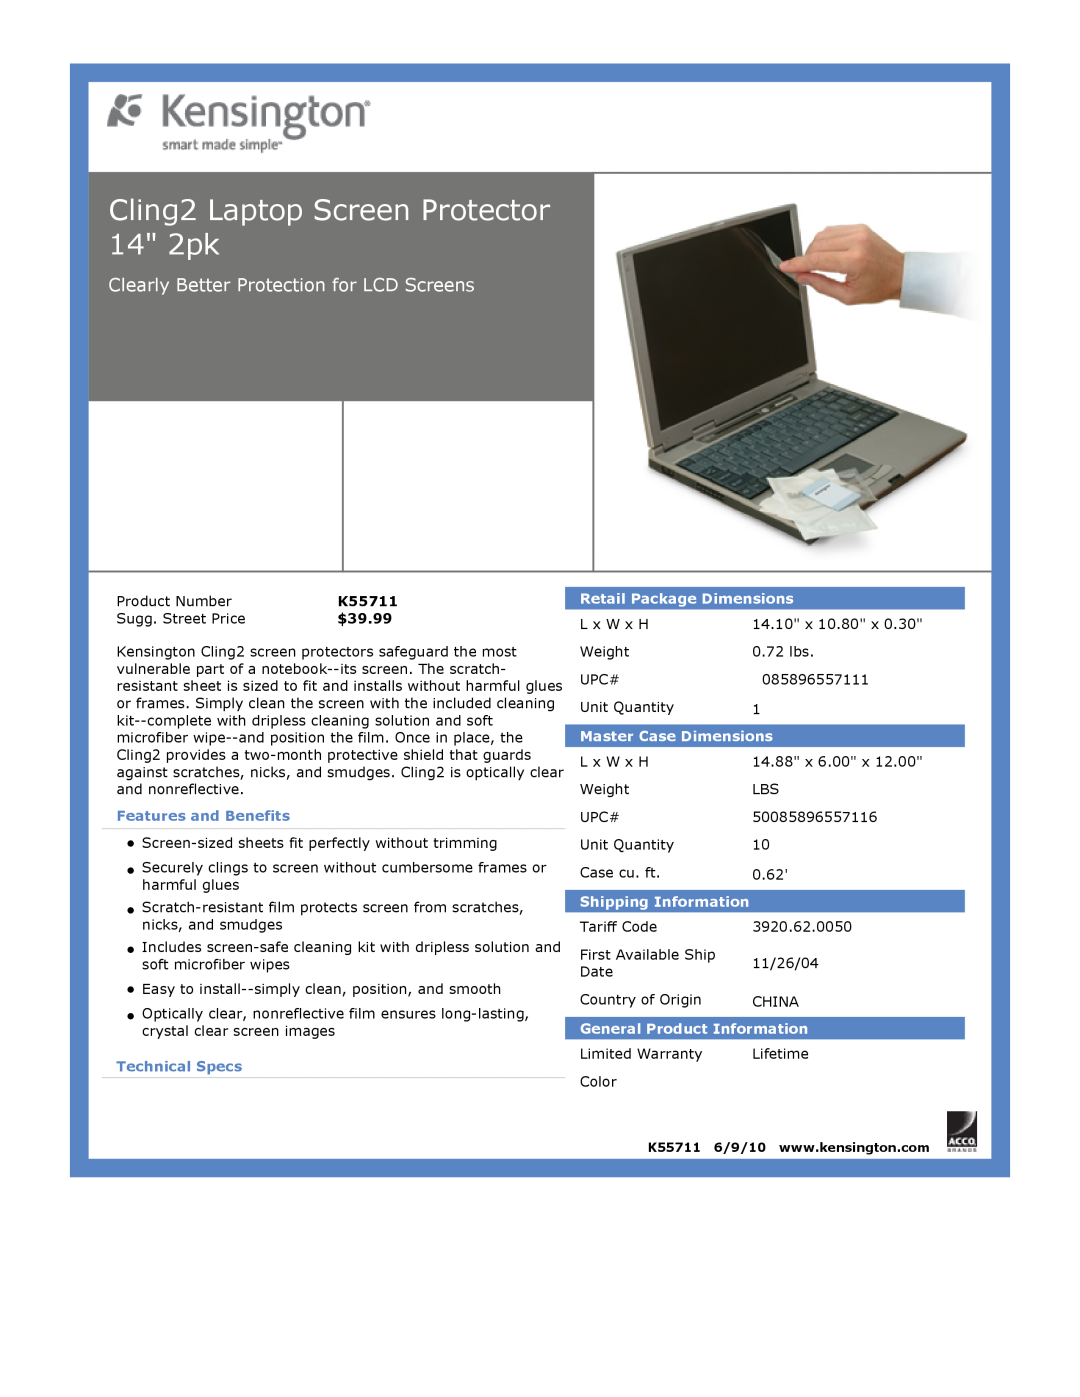 Kensington EU64325 dimensions Cling2 Laptop Screen Protector 14 2pk, Clearly Better Protection for LCD Screens, $39.99 